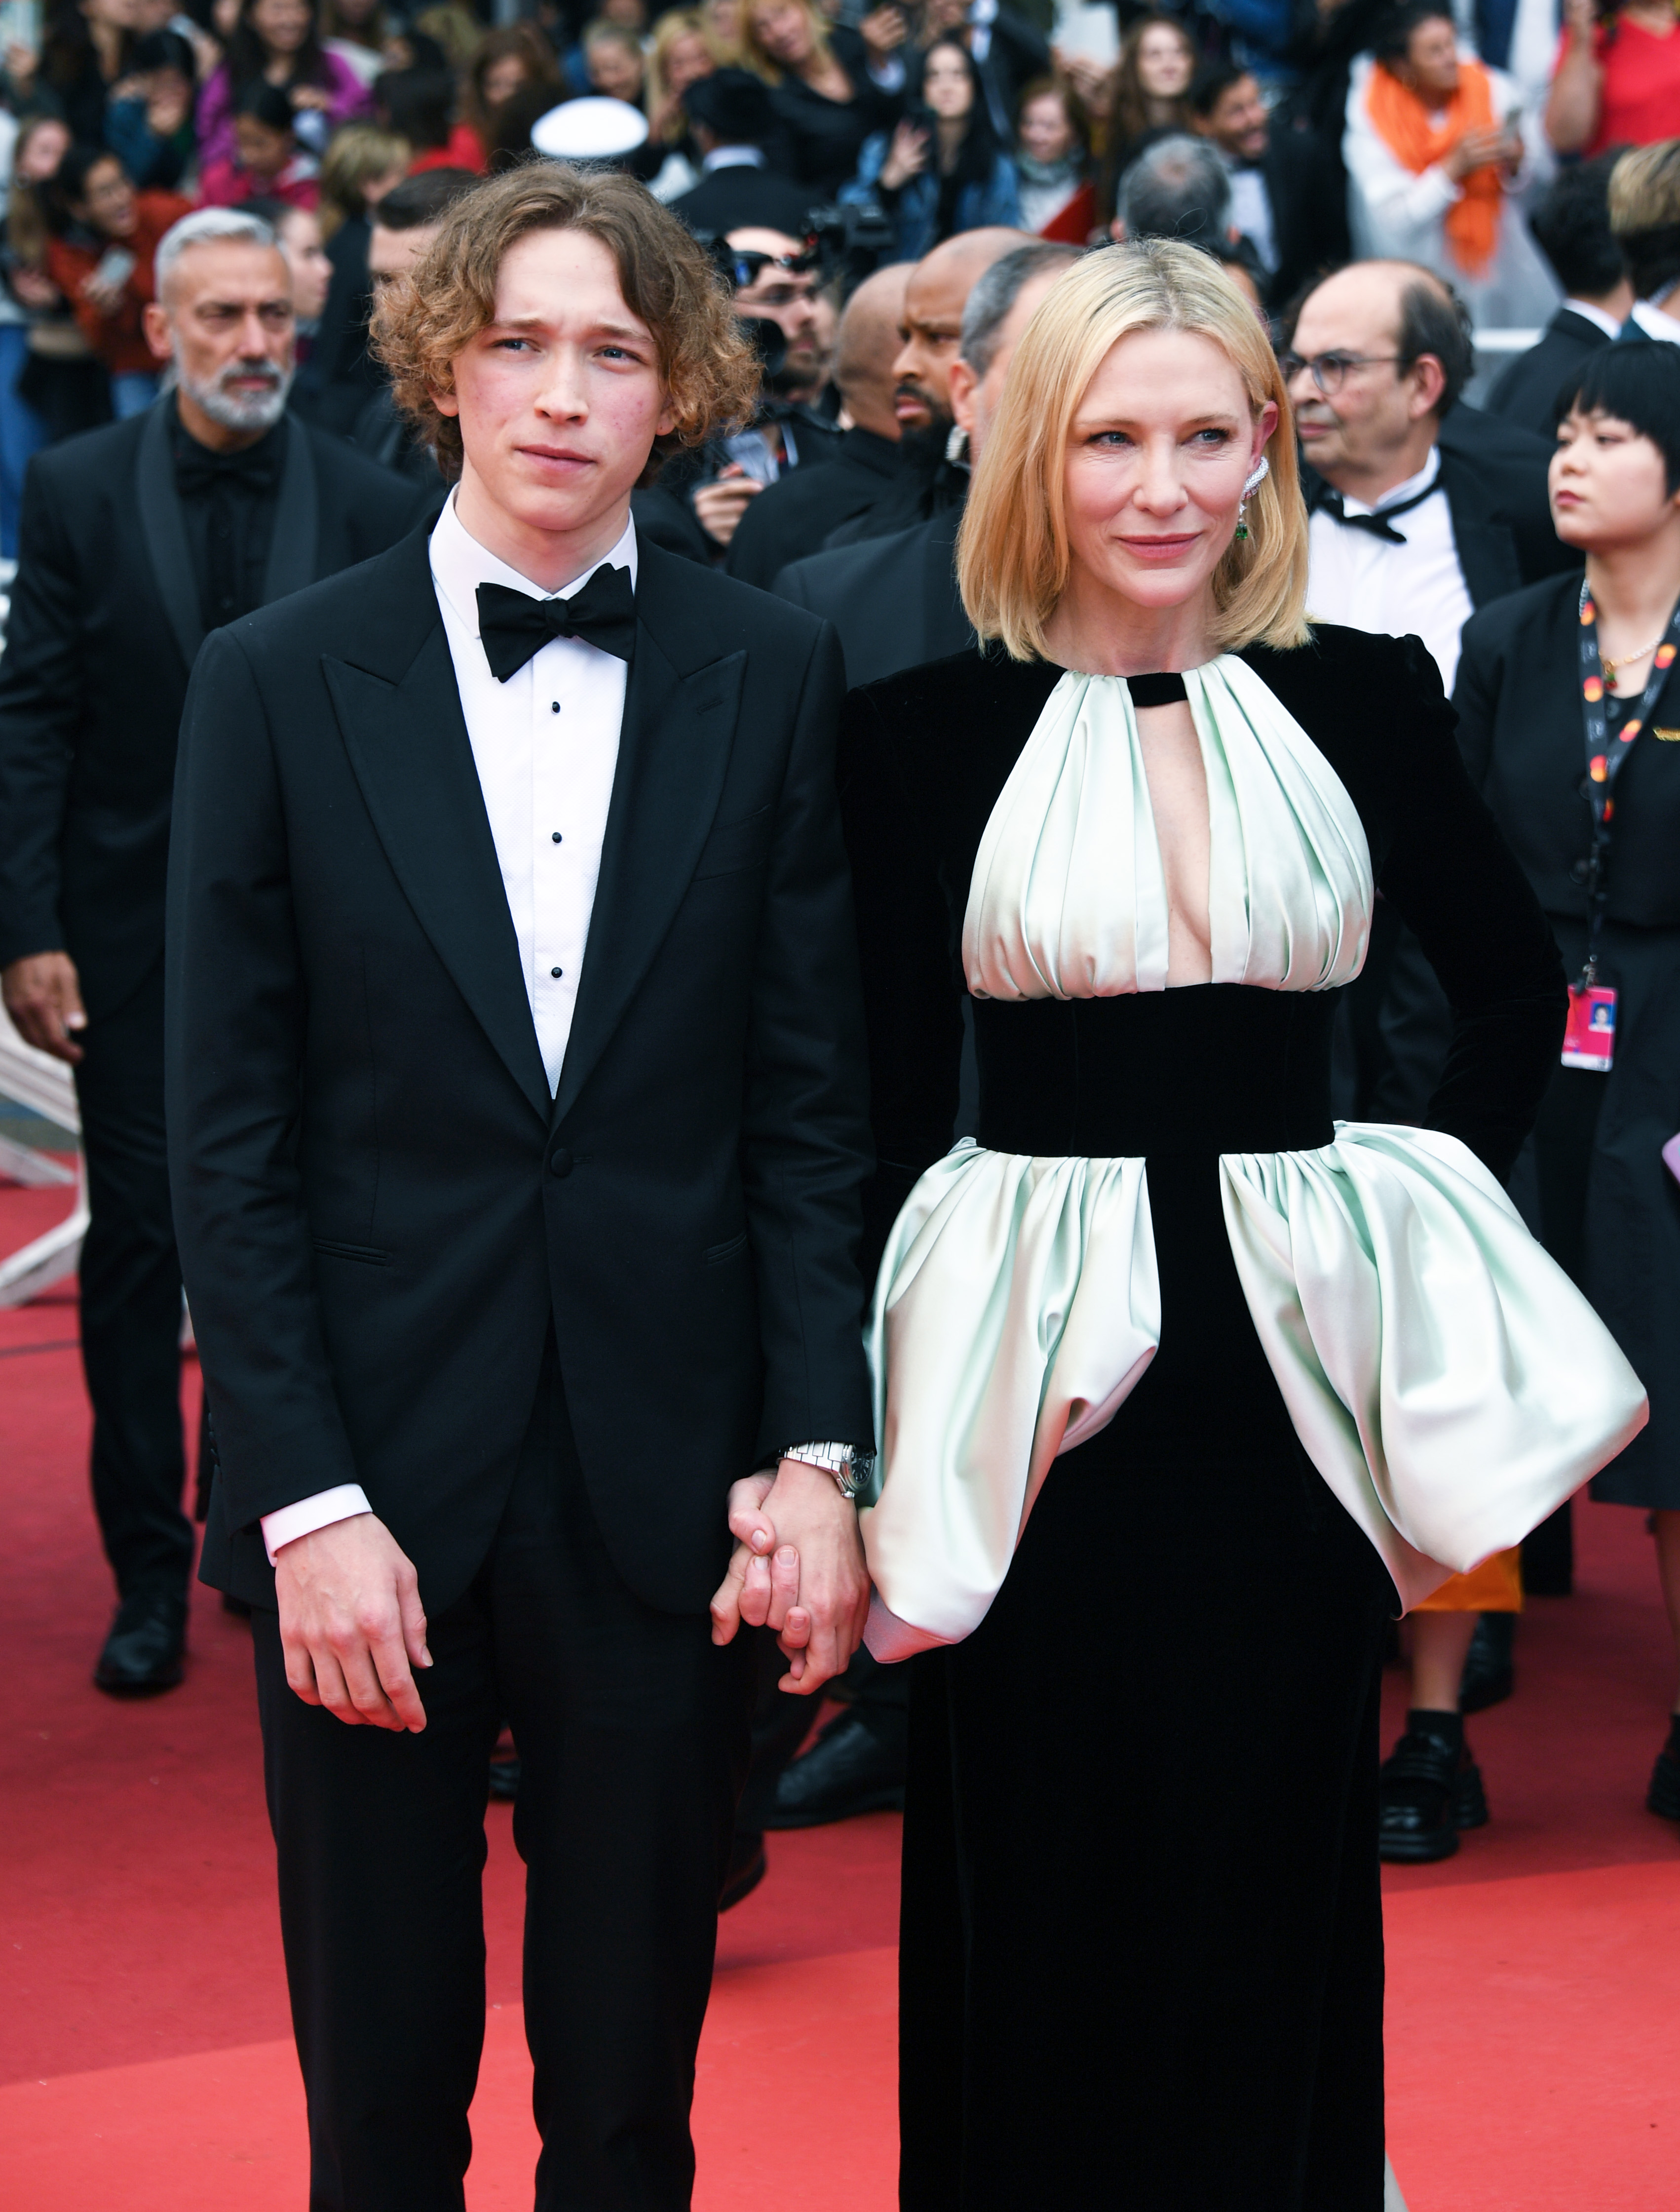 Dashiell John Upton and Cate Blanchett at the "Killers Of The Flower Moon" red carpet in Cannes, France on May 20, 2023 | Source: Getty Images